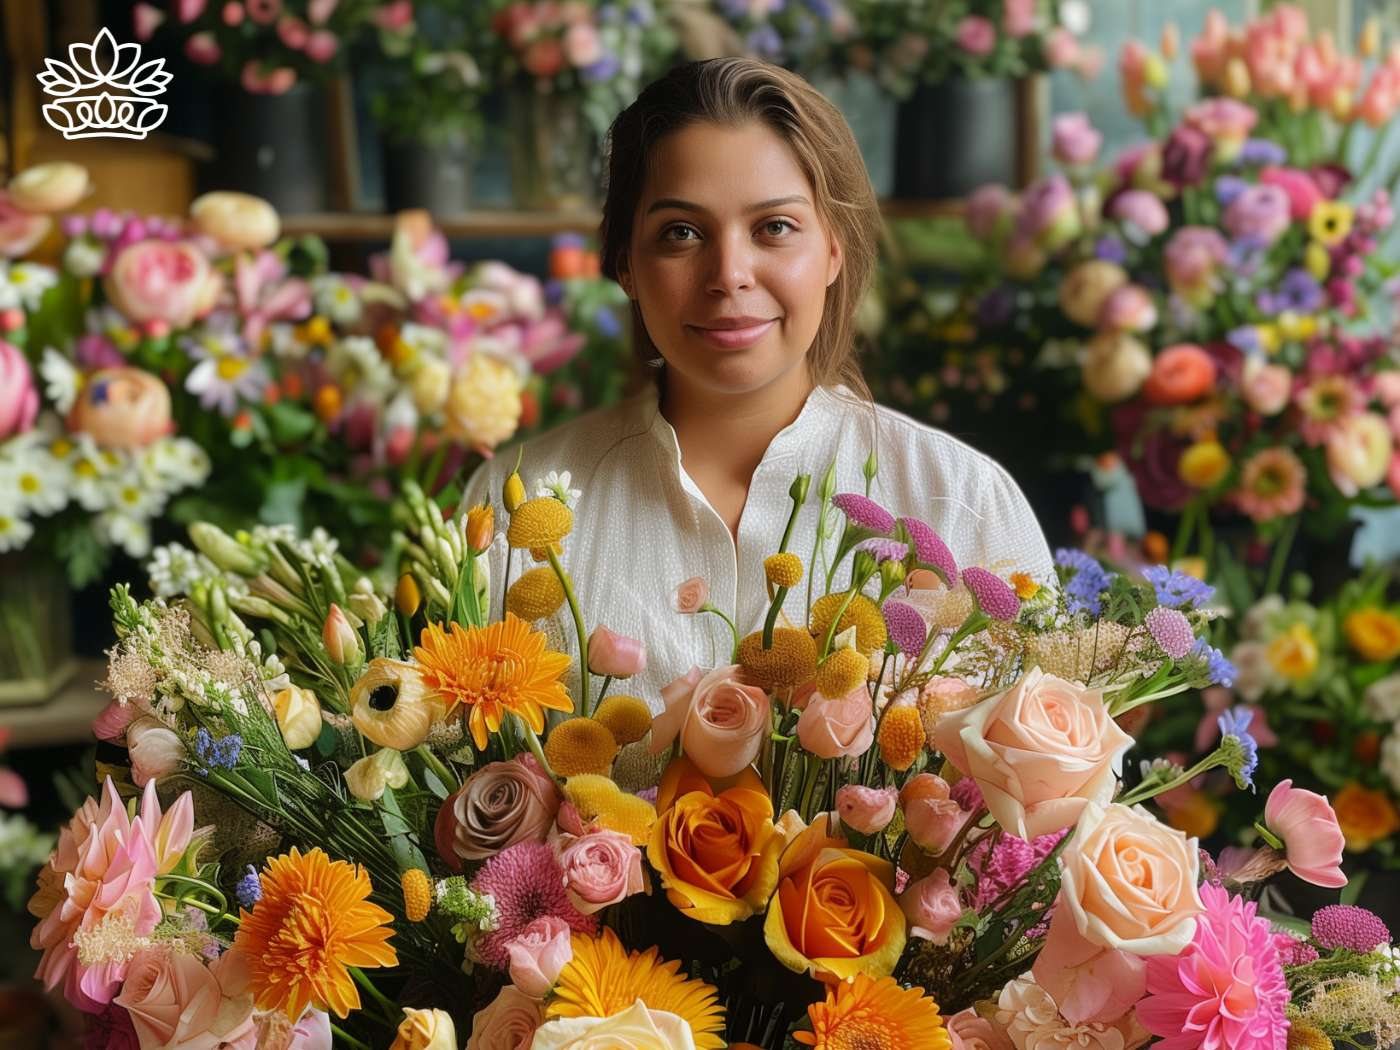 Radiant young woman with a welcoming smile surrounded by a lush bouquet including soft peach roses, delicate lilies, and sunny daisies, set against a backdrop of a floral paradise—Fabulous Flowers and Gifts.